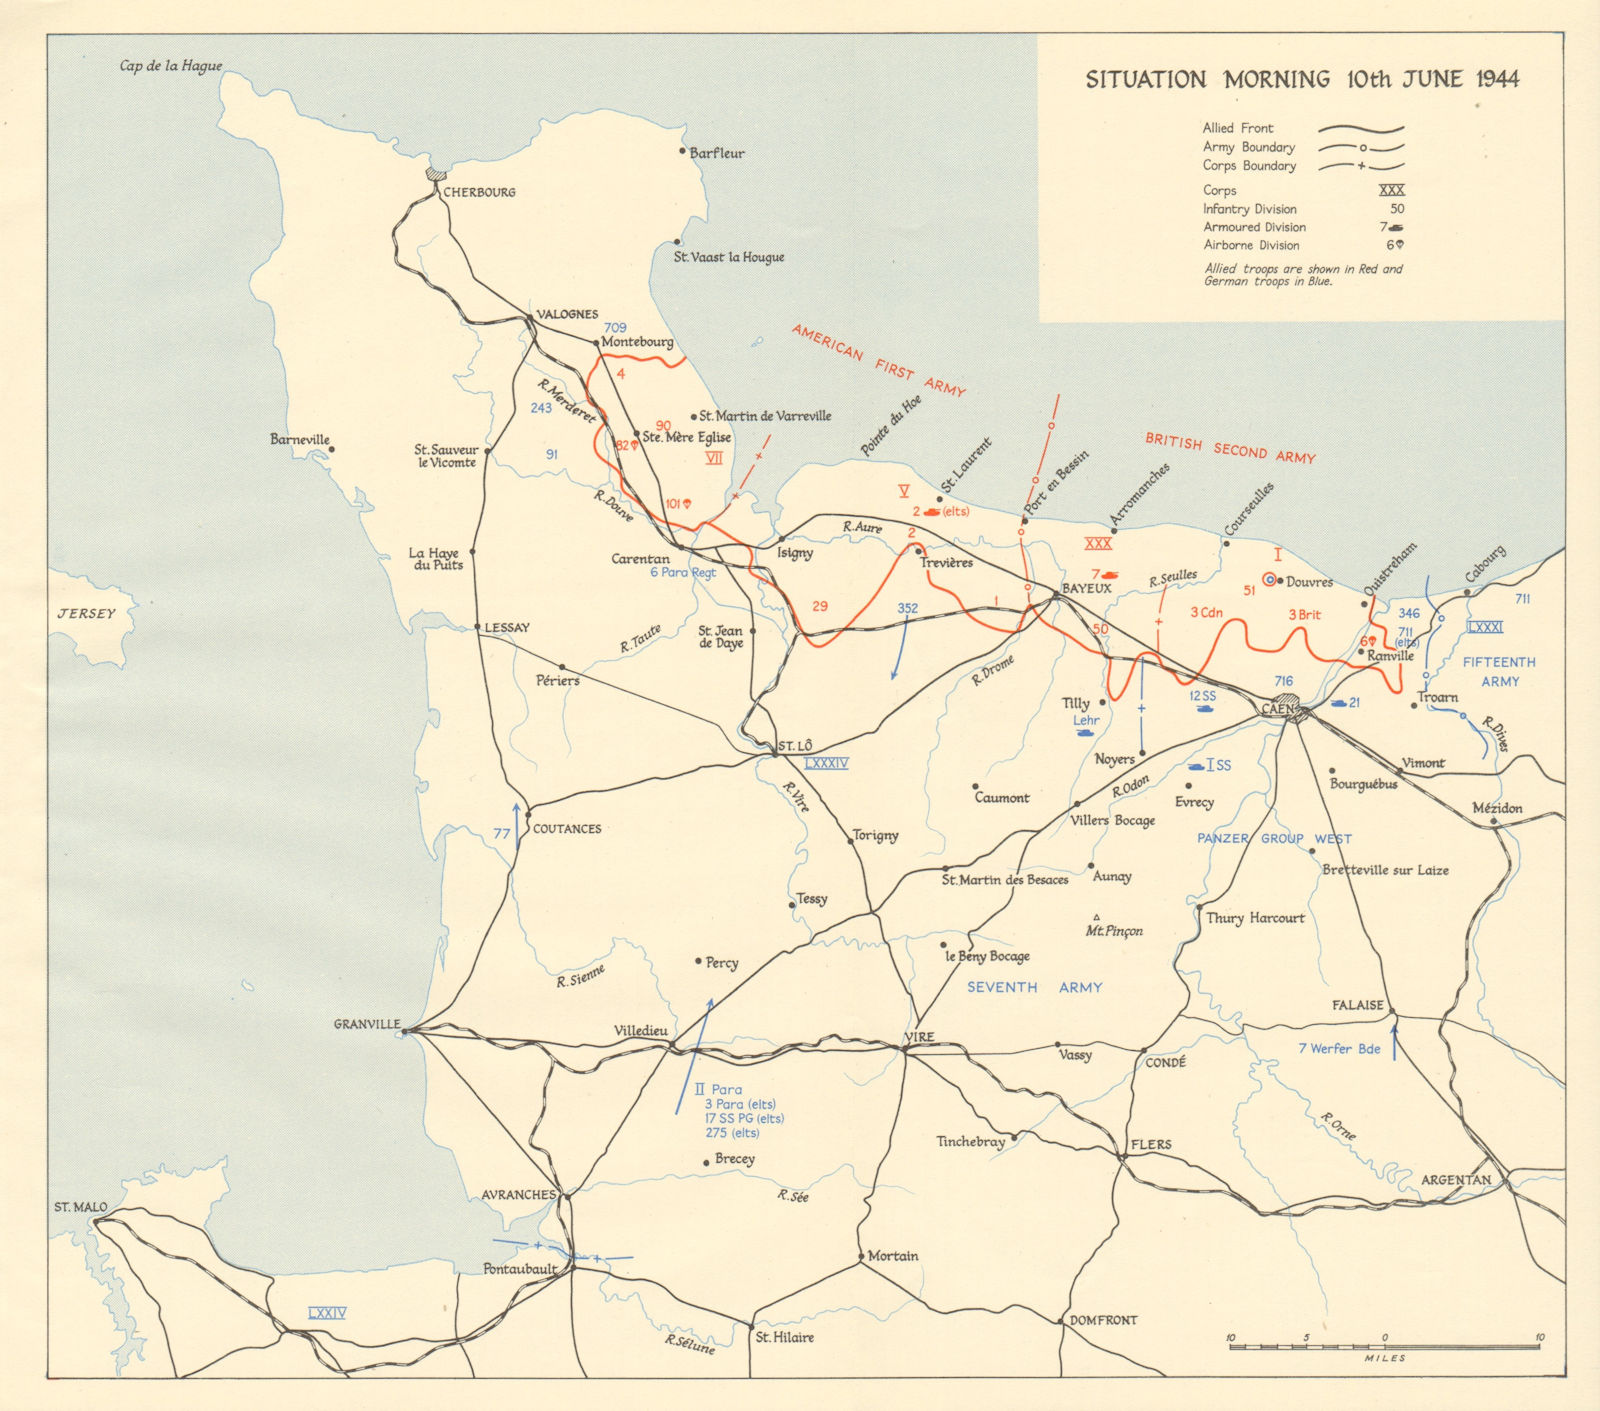 D-Day Normandy landings. Situation morning 10th June 1944. Overlord 1962 map